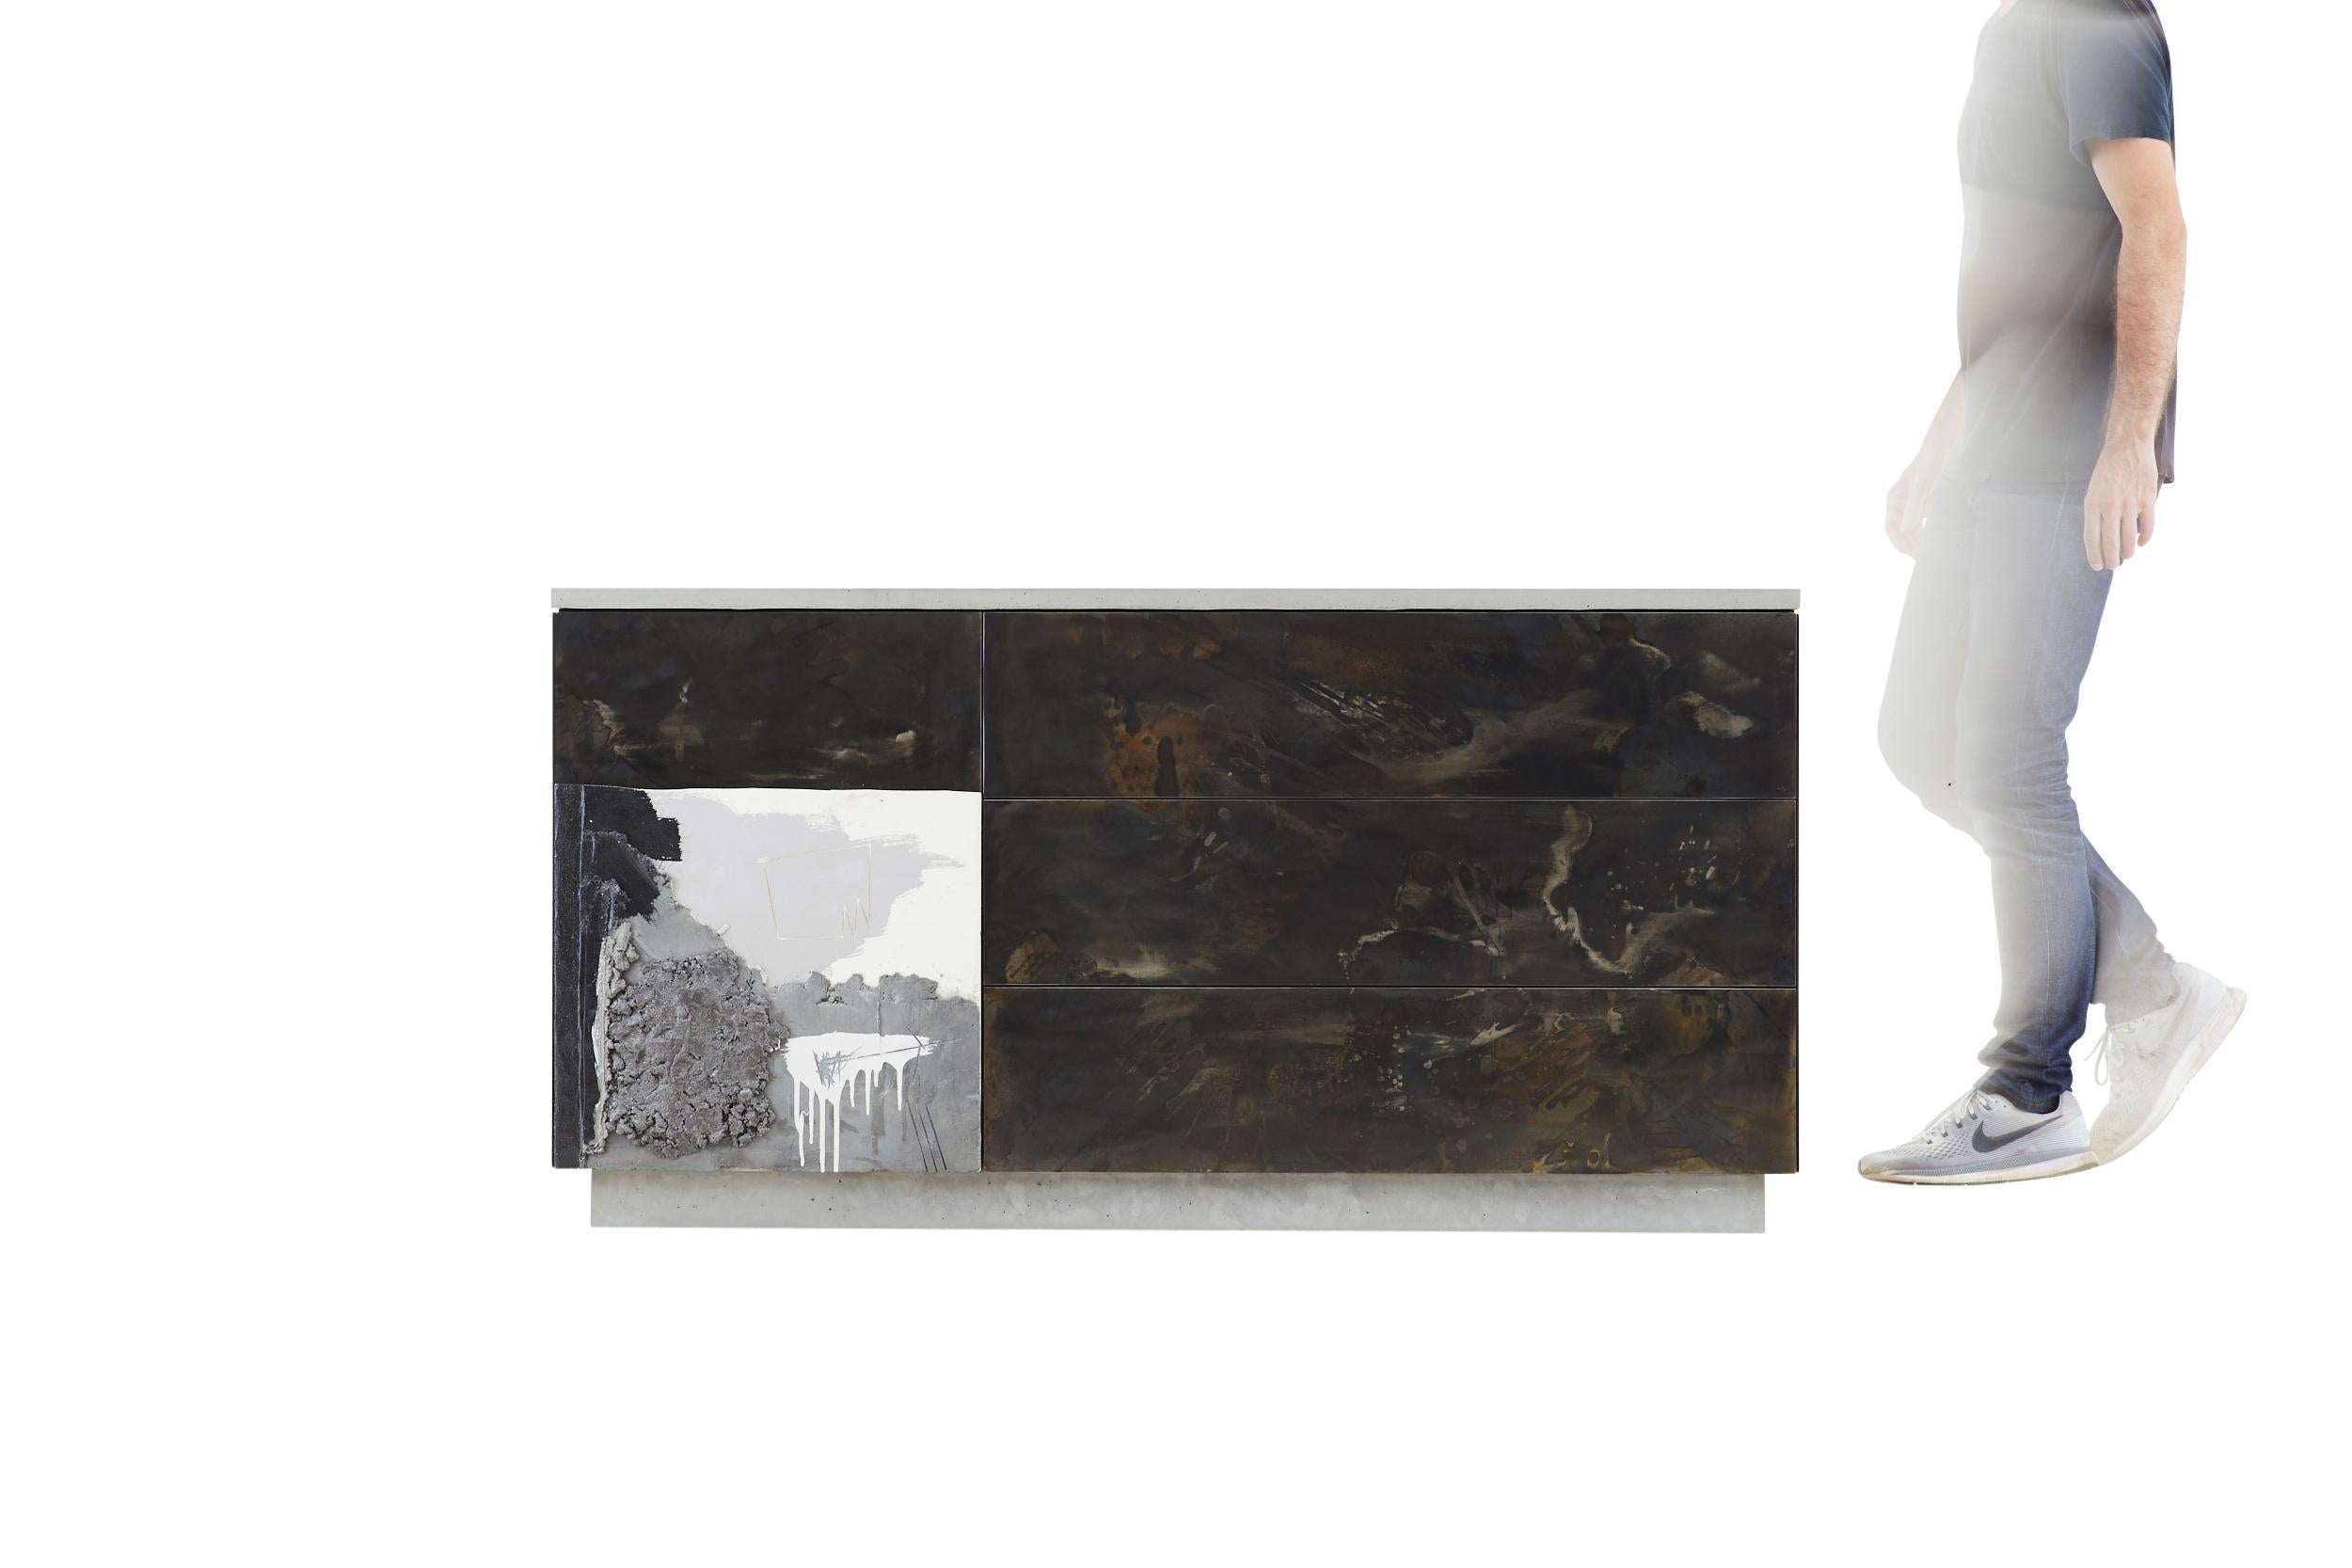 C-3 integrates three elemental materials, concrete, steel and wood. Stefan Rurak applies his unique concrete art treatment to the door. (Please note each piece will vary with unique drawings and the image is only an example) The counter-top as well